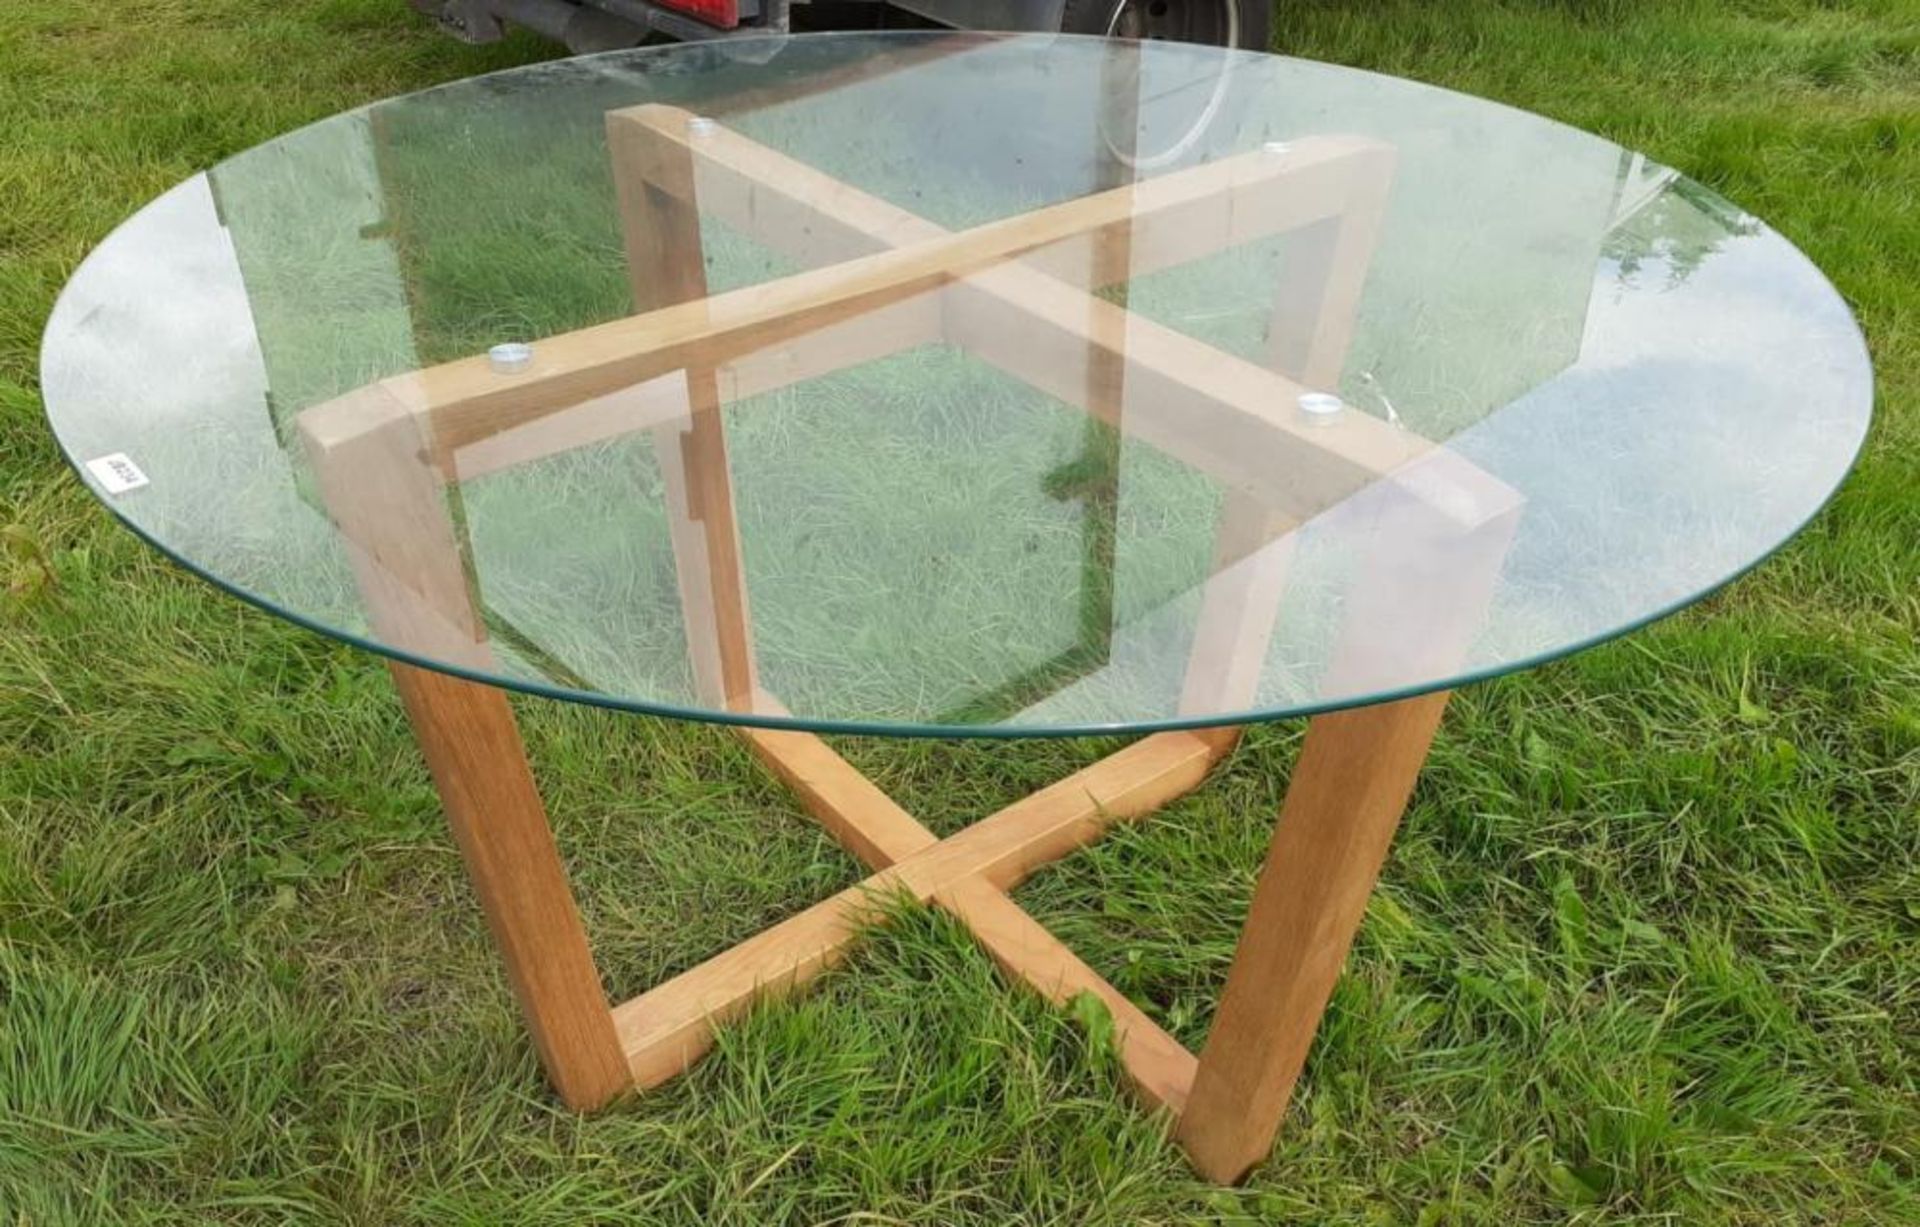 1 x Contemporary Round Glass Topped Dining Table and Wood Base - Dimensions: Top Diameter 135cm x - Image 2 of 4